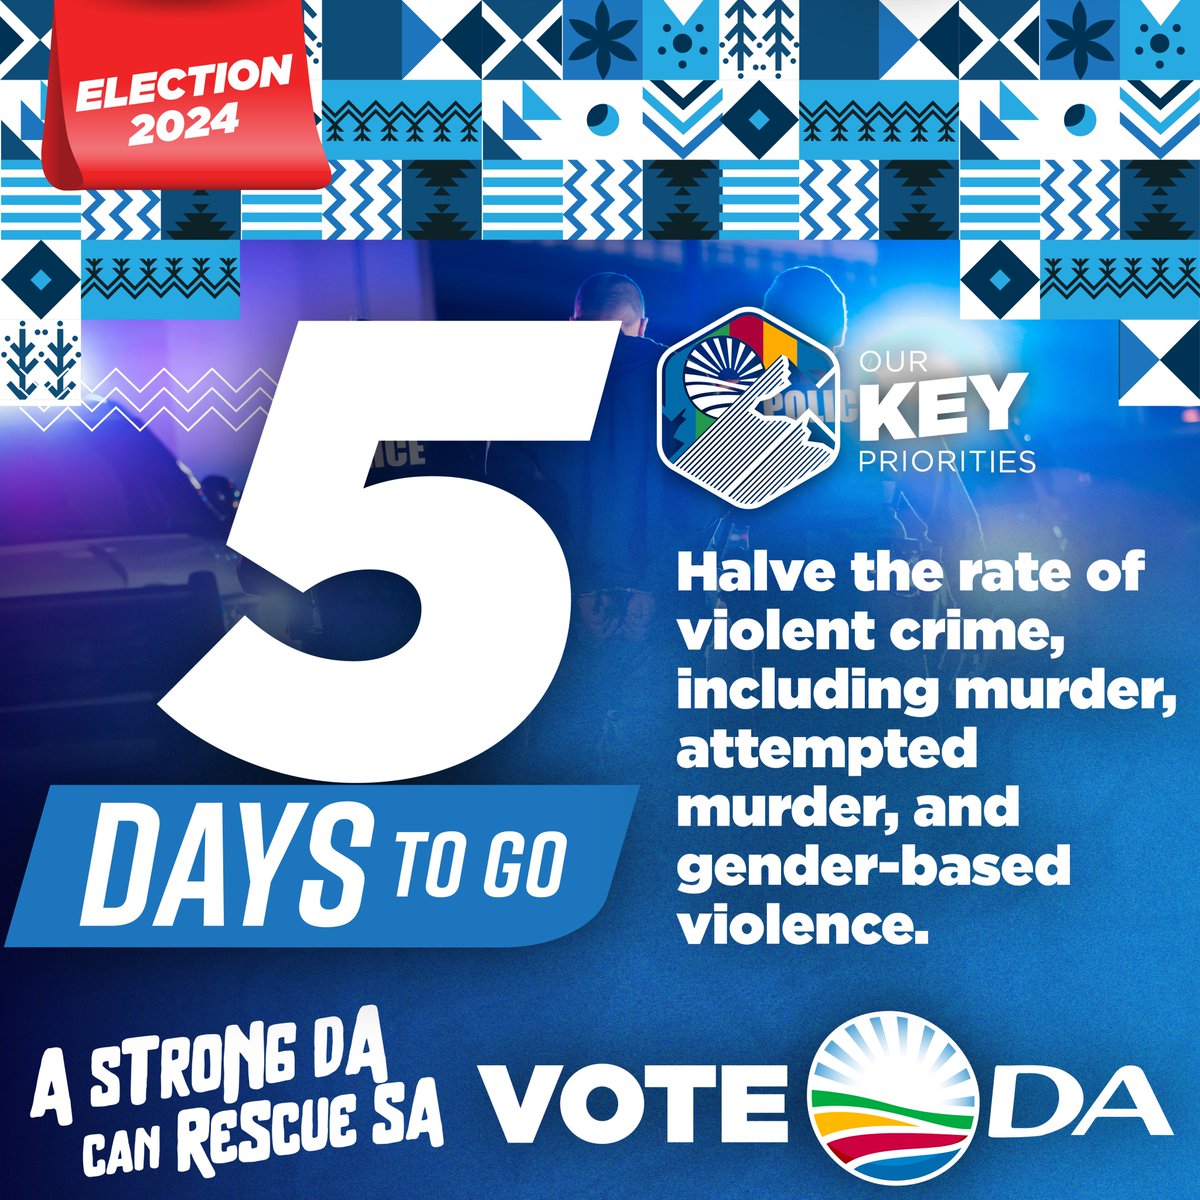 5️⃣ DAYS TO GO! The DA has a plan to halve the rate of violent crime, including murder, attempted murder, and gender-based violence. On 29 May, choose a party that is committed to making our communities safer. Choose the DA! #VoteDA #RescueSA